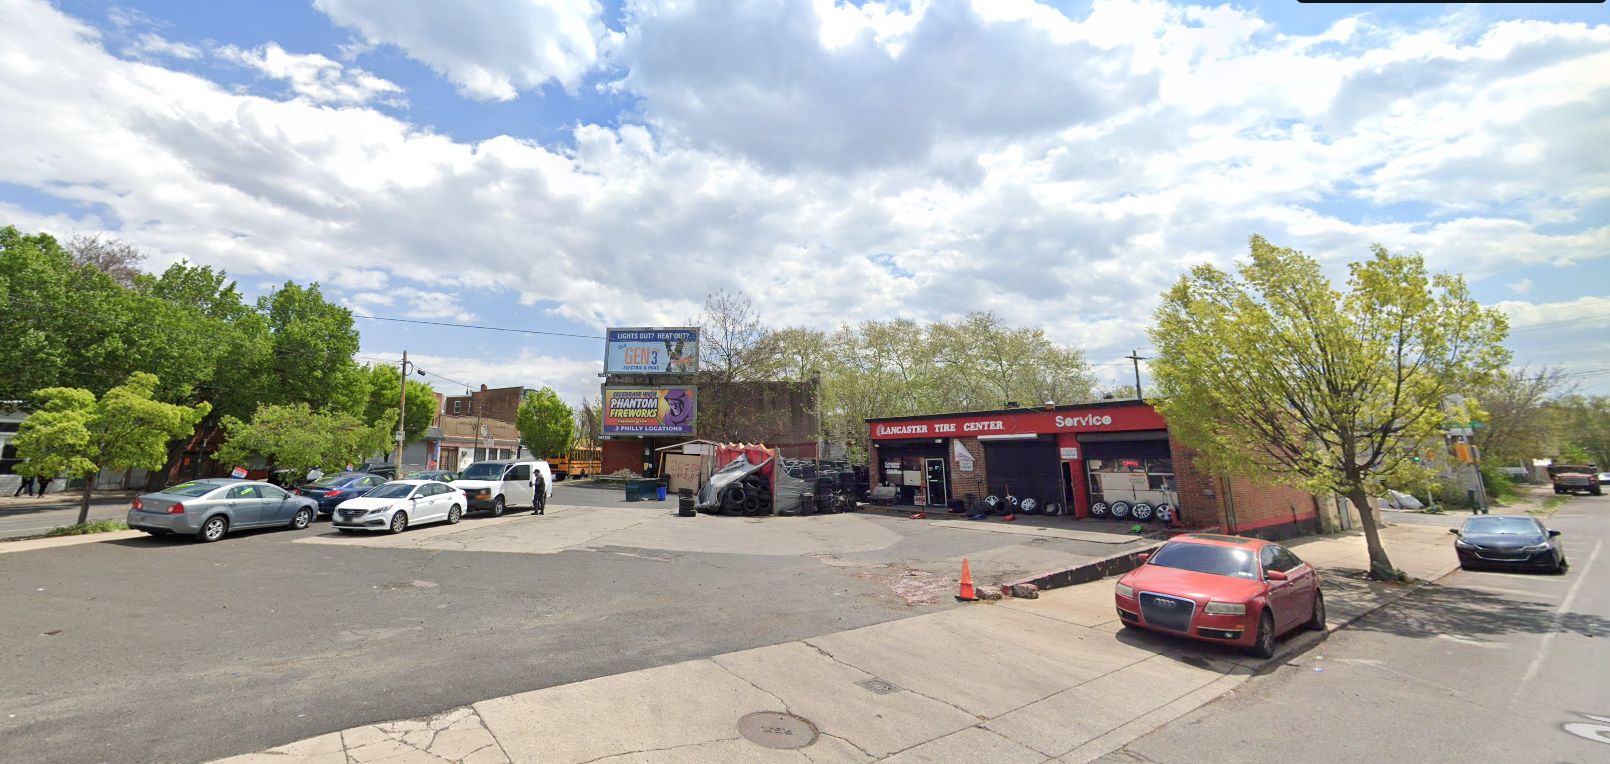 4328 Lancaster Avenue prior to redevelopment. Looking southeast. April 2023. Credit: Google Maps